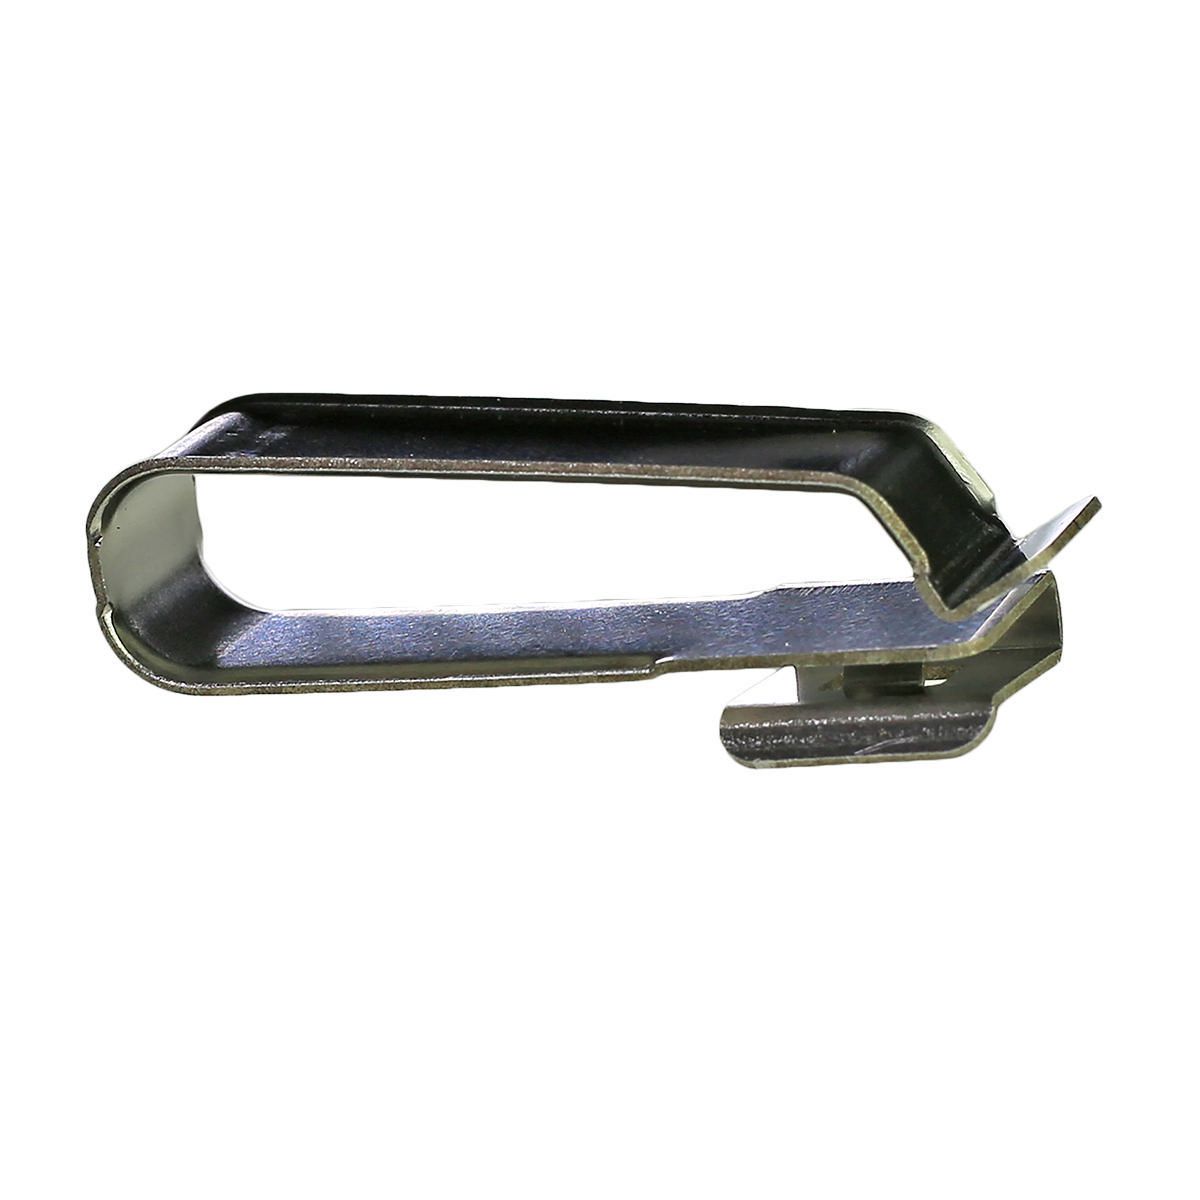 WILEY CABLE CLIP - 4 WIRE 90 DEGREE